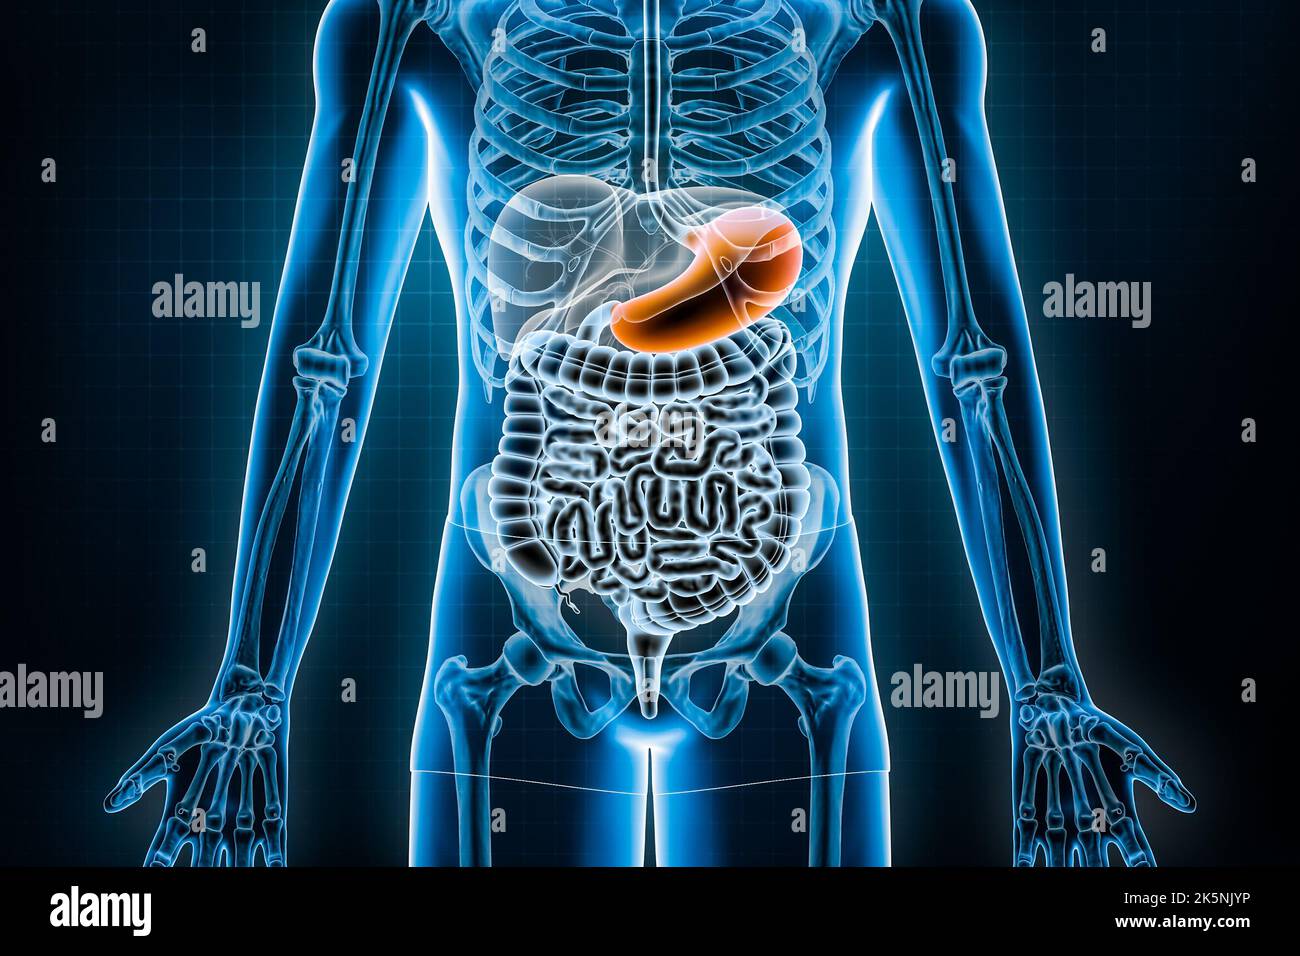 Stomach 3D rendering illustration. Anterior or front view of the human digestive system and gastrointestinal tract or bowels. Anatomy, medical, biolog Stock Photo